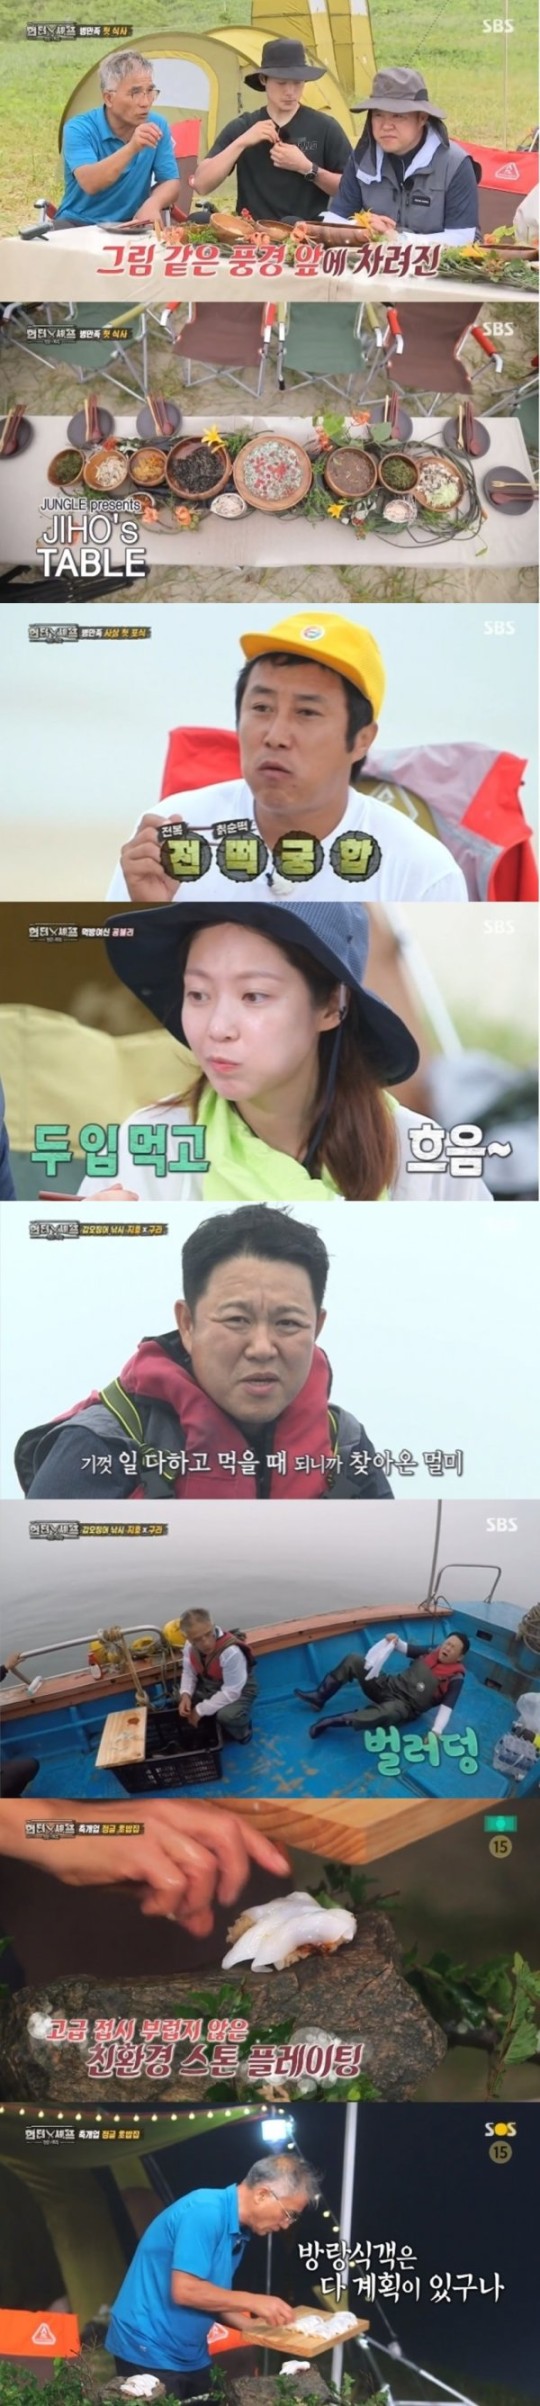 Law of the Jungle Chef Ji-ho Lim makes eyes and mouth enjoyable with various ingredients that the members caught